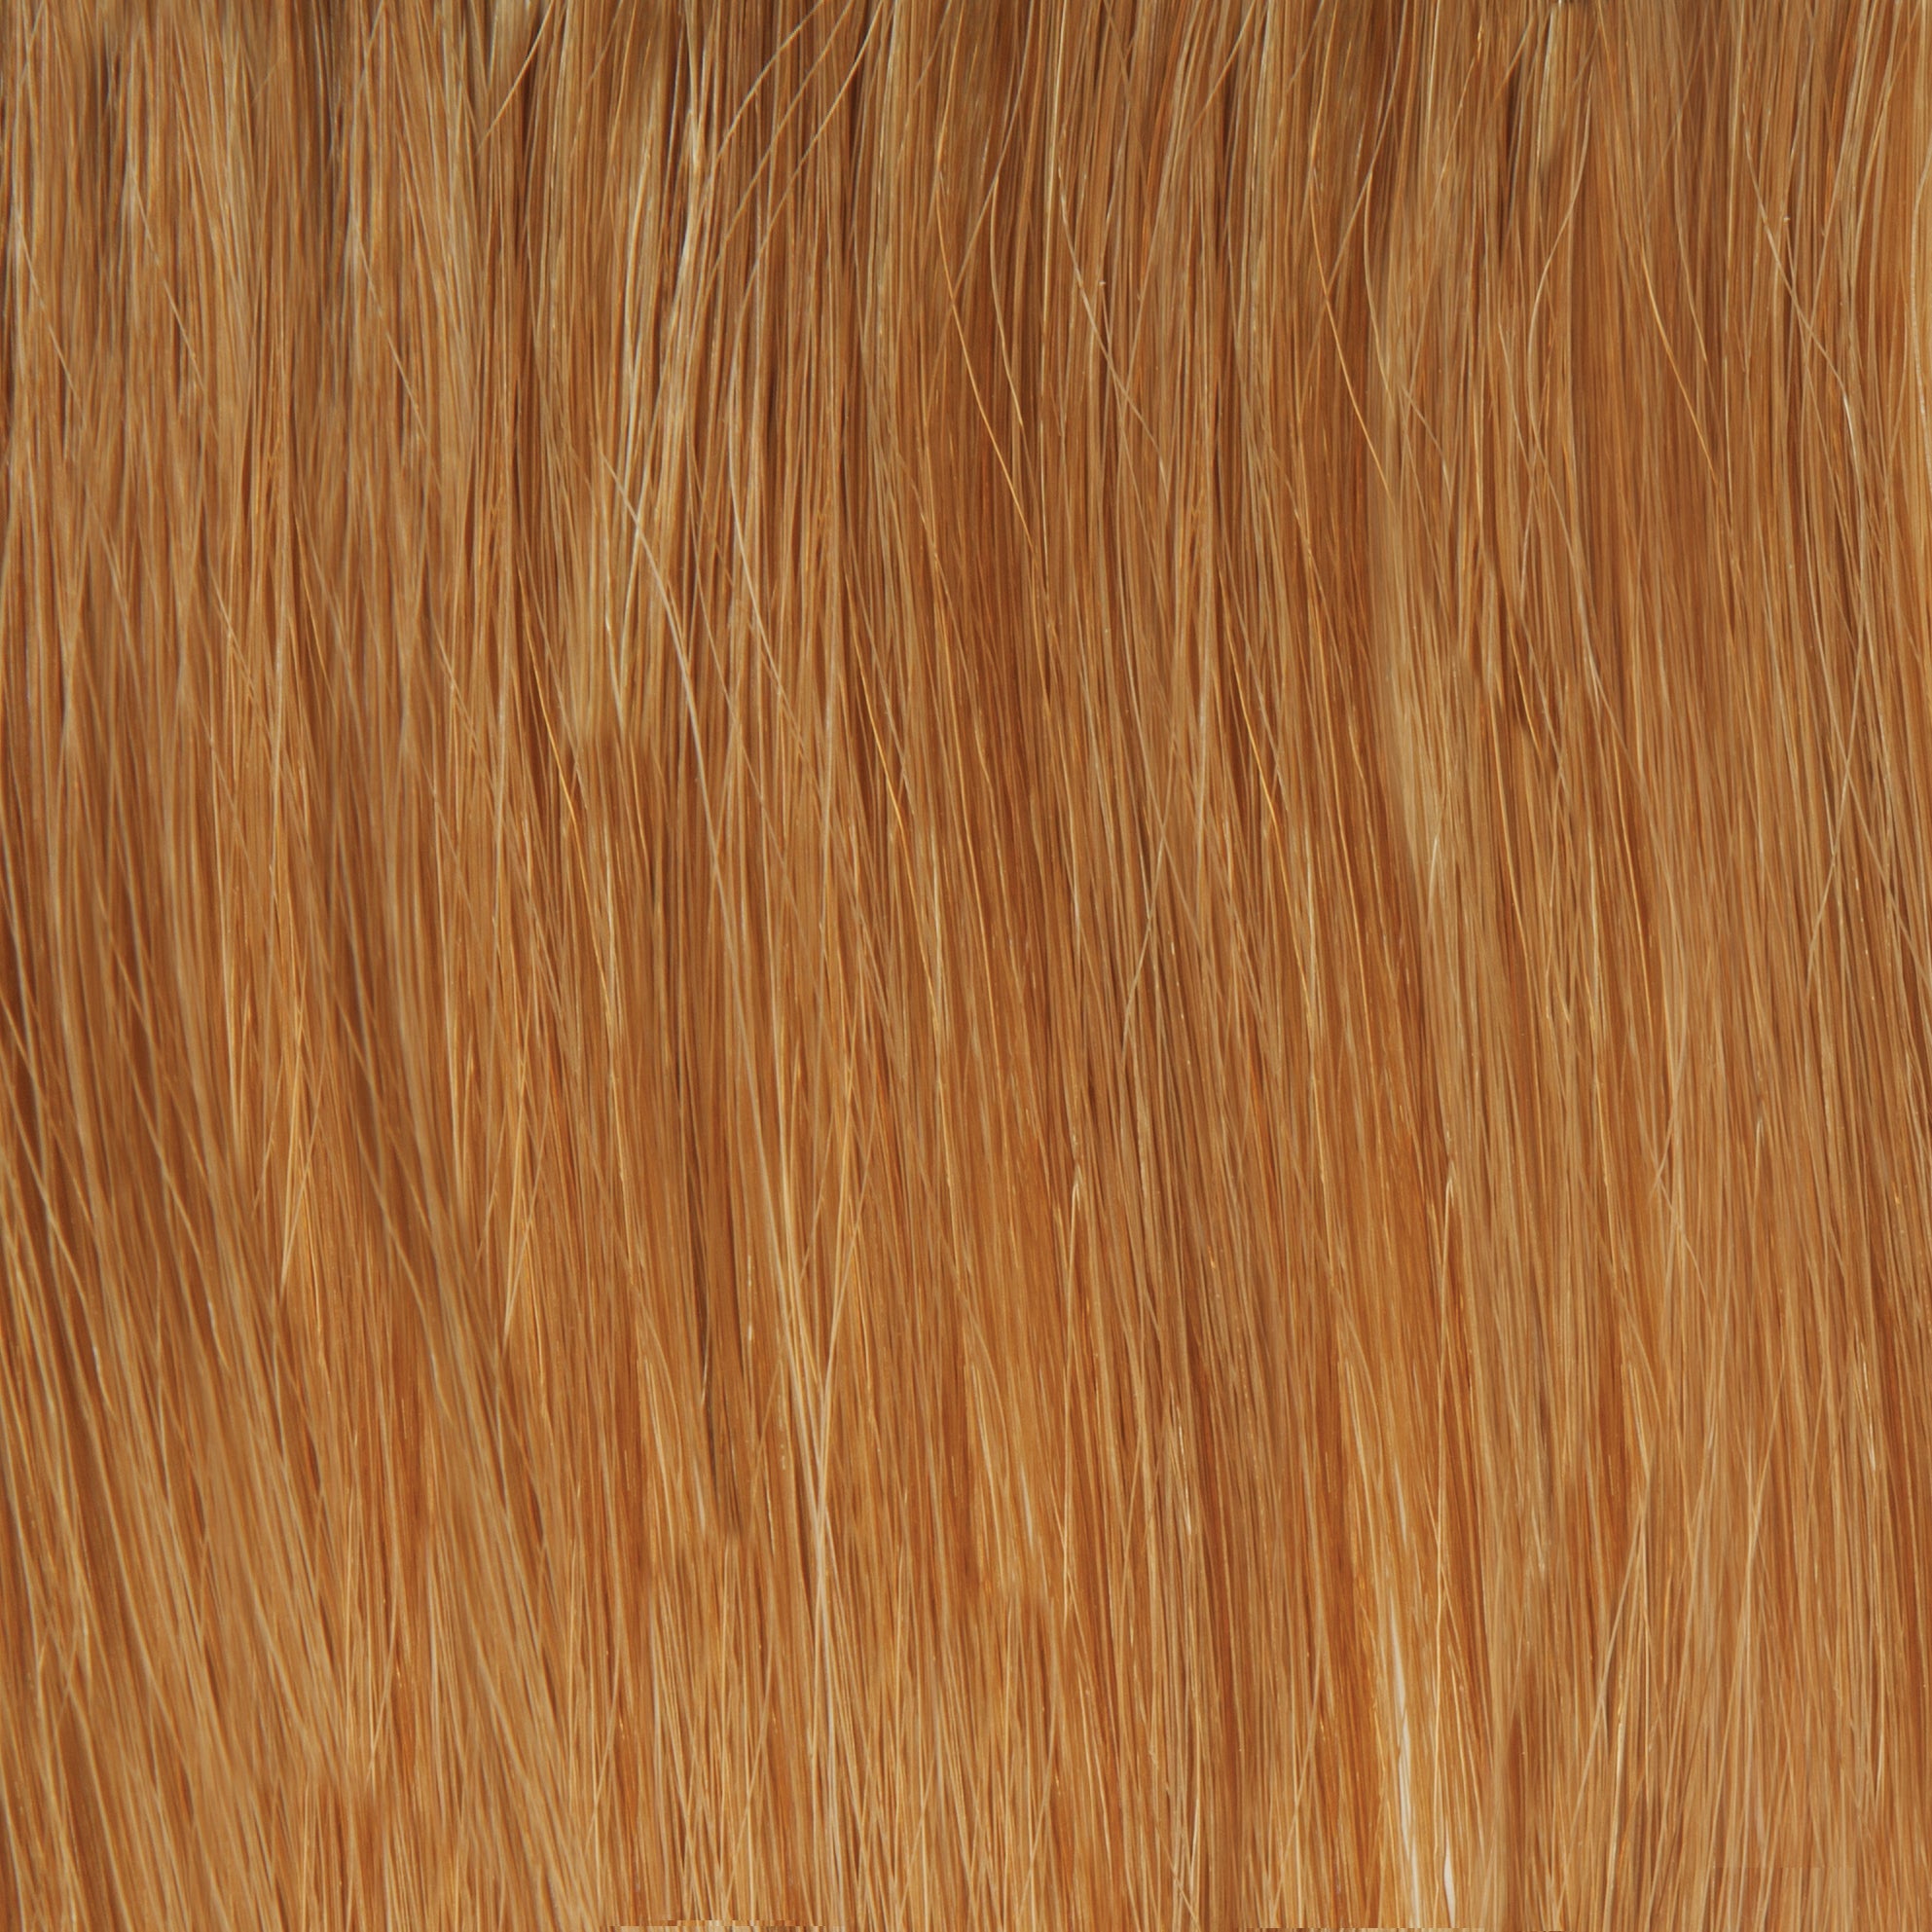 MichelleSF14 | European Human Hair Swiss Lace Front Wig (Hand-Tied) UK STOCK